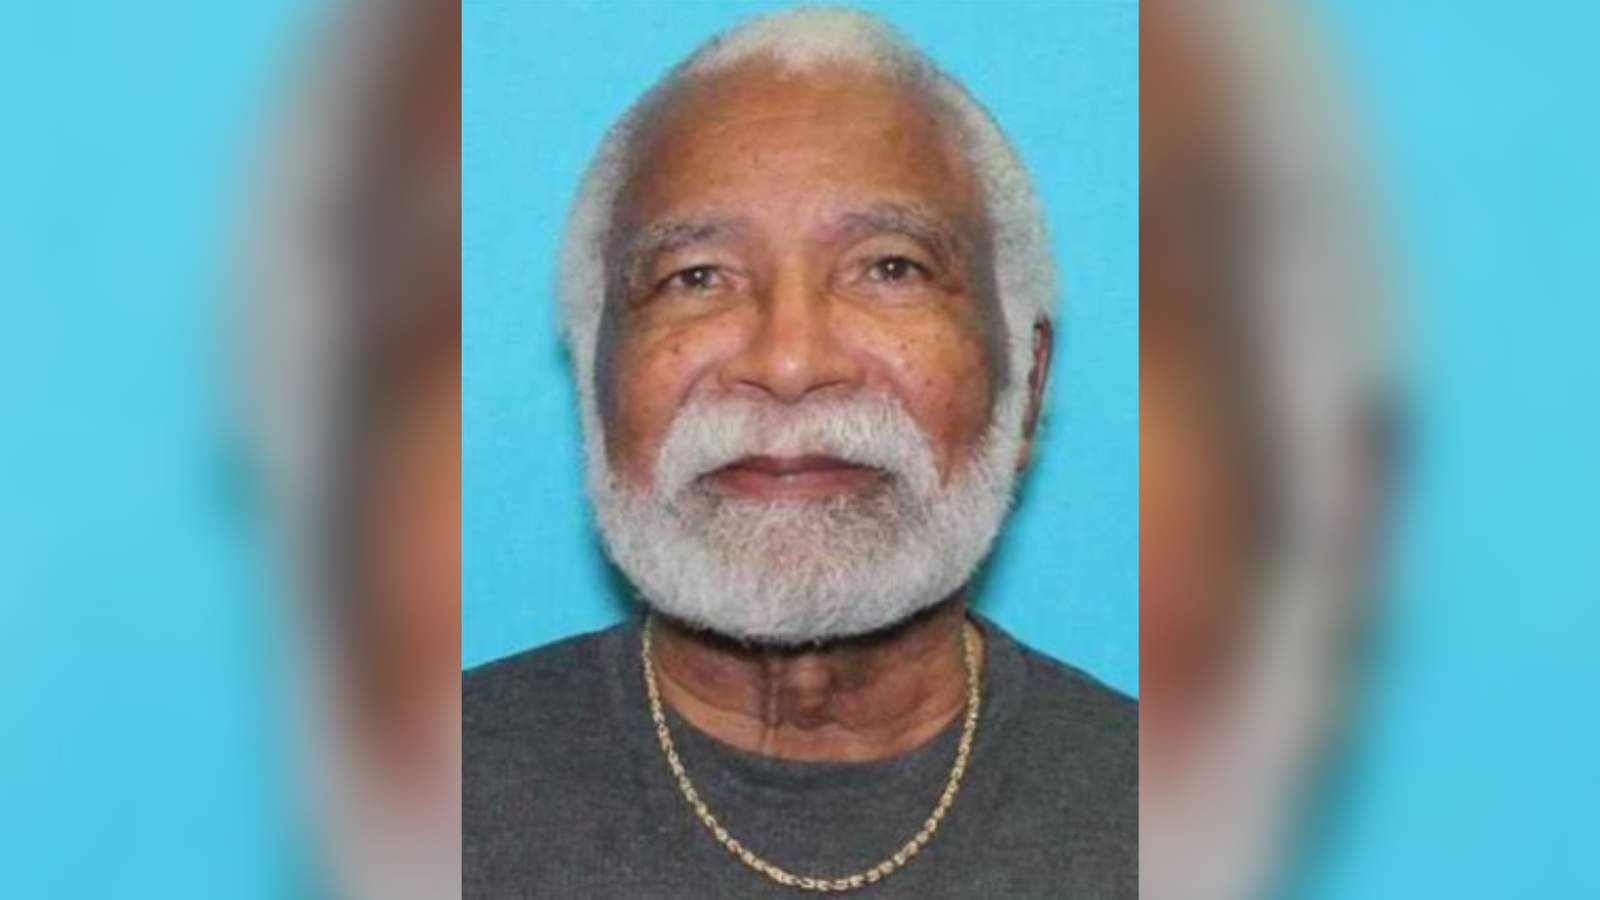 Houston police searching for missing 84-year-old man